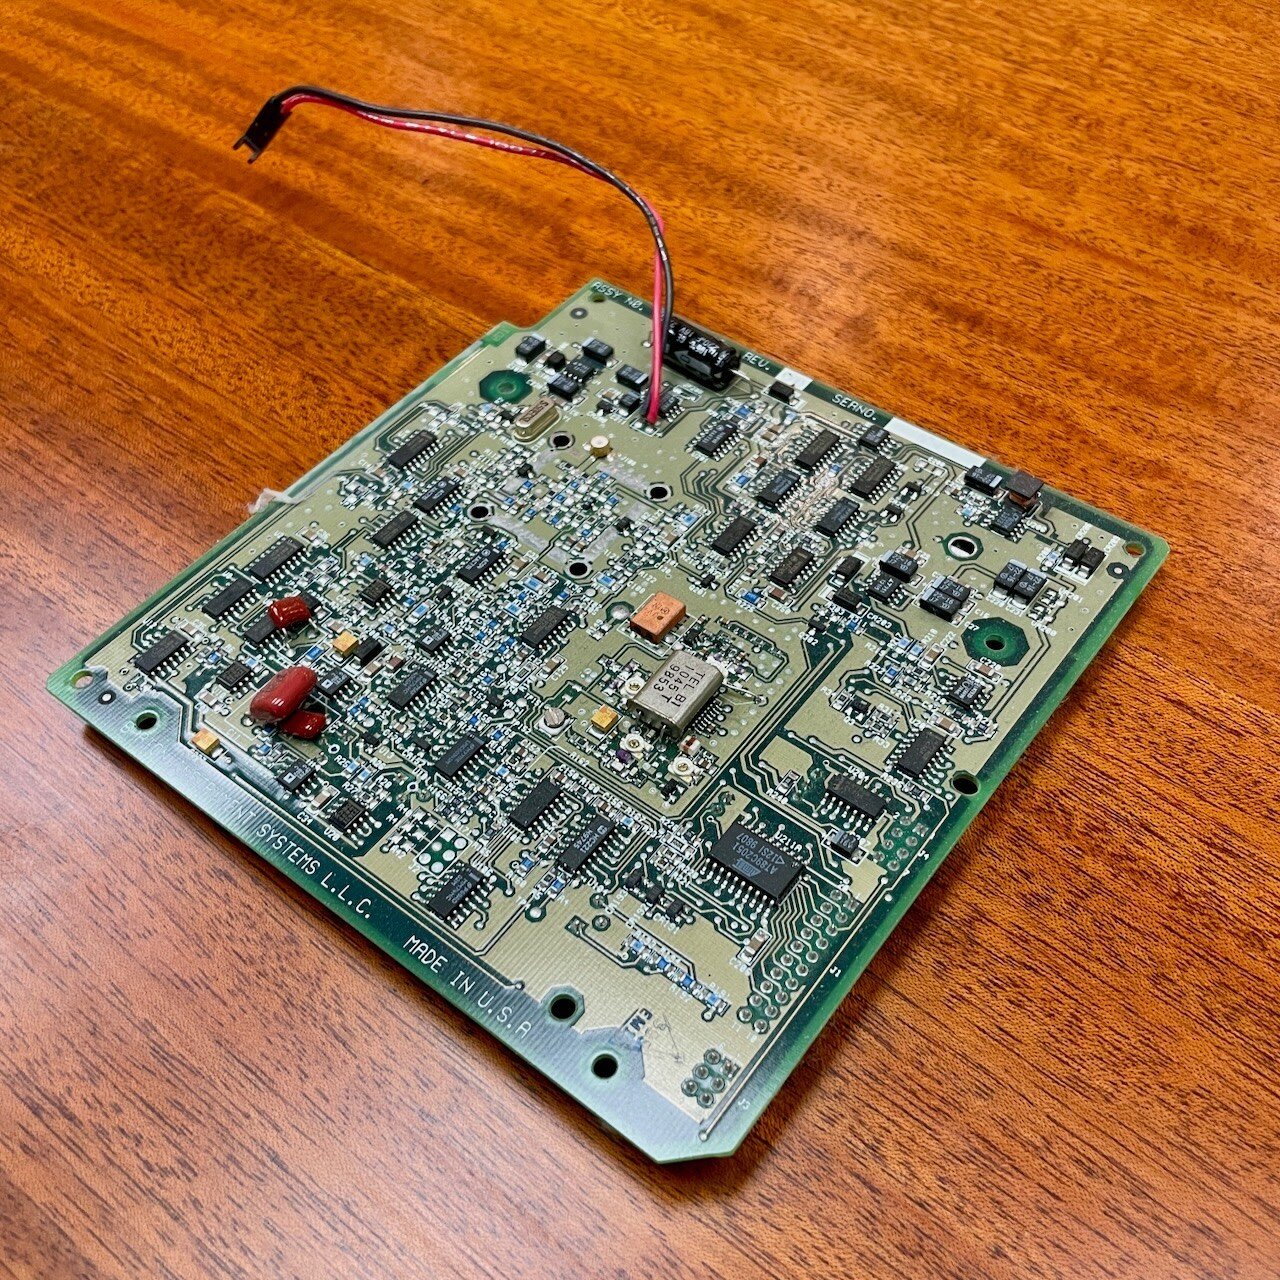 It's Throwback Thursday! Sometimes clients come to us with a request to make a good product better. This was a sophisticated fuel tank level monitoring system, and in the middle of the board is a wireless data transmitter we added to make the unit ev